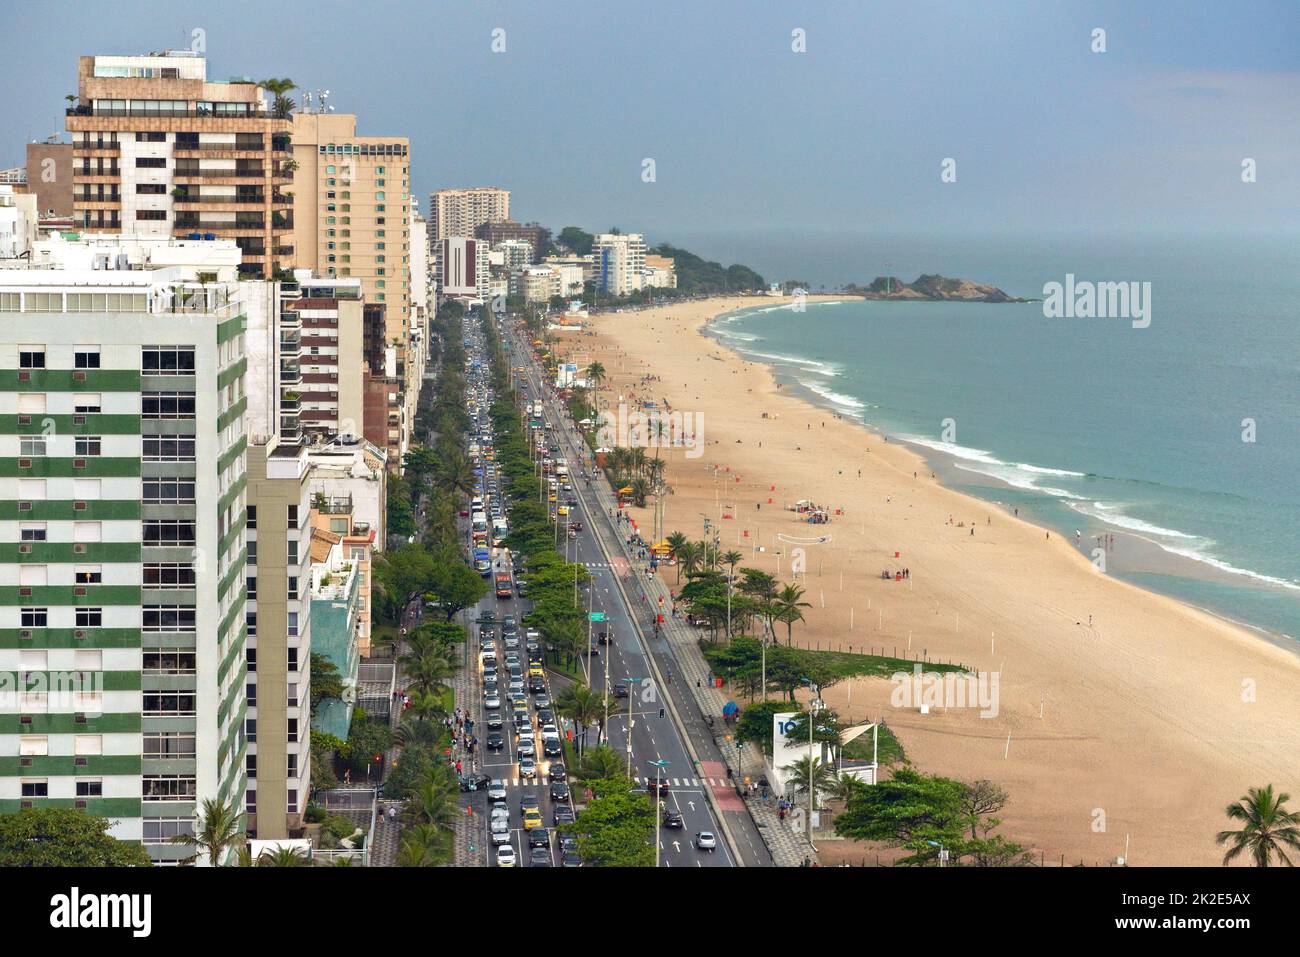 Take a vacation in paradise. An aerial view of the beaches in Rio de Janeiro, Brazil. Stock Photo